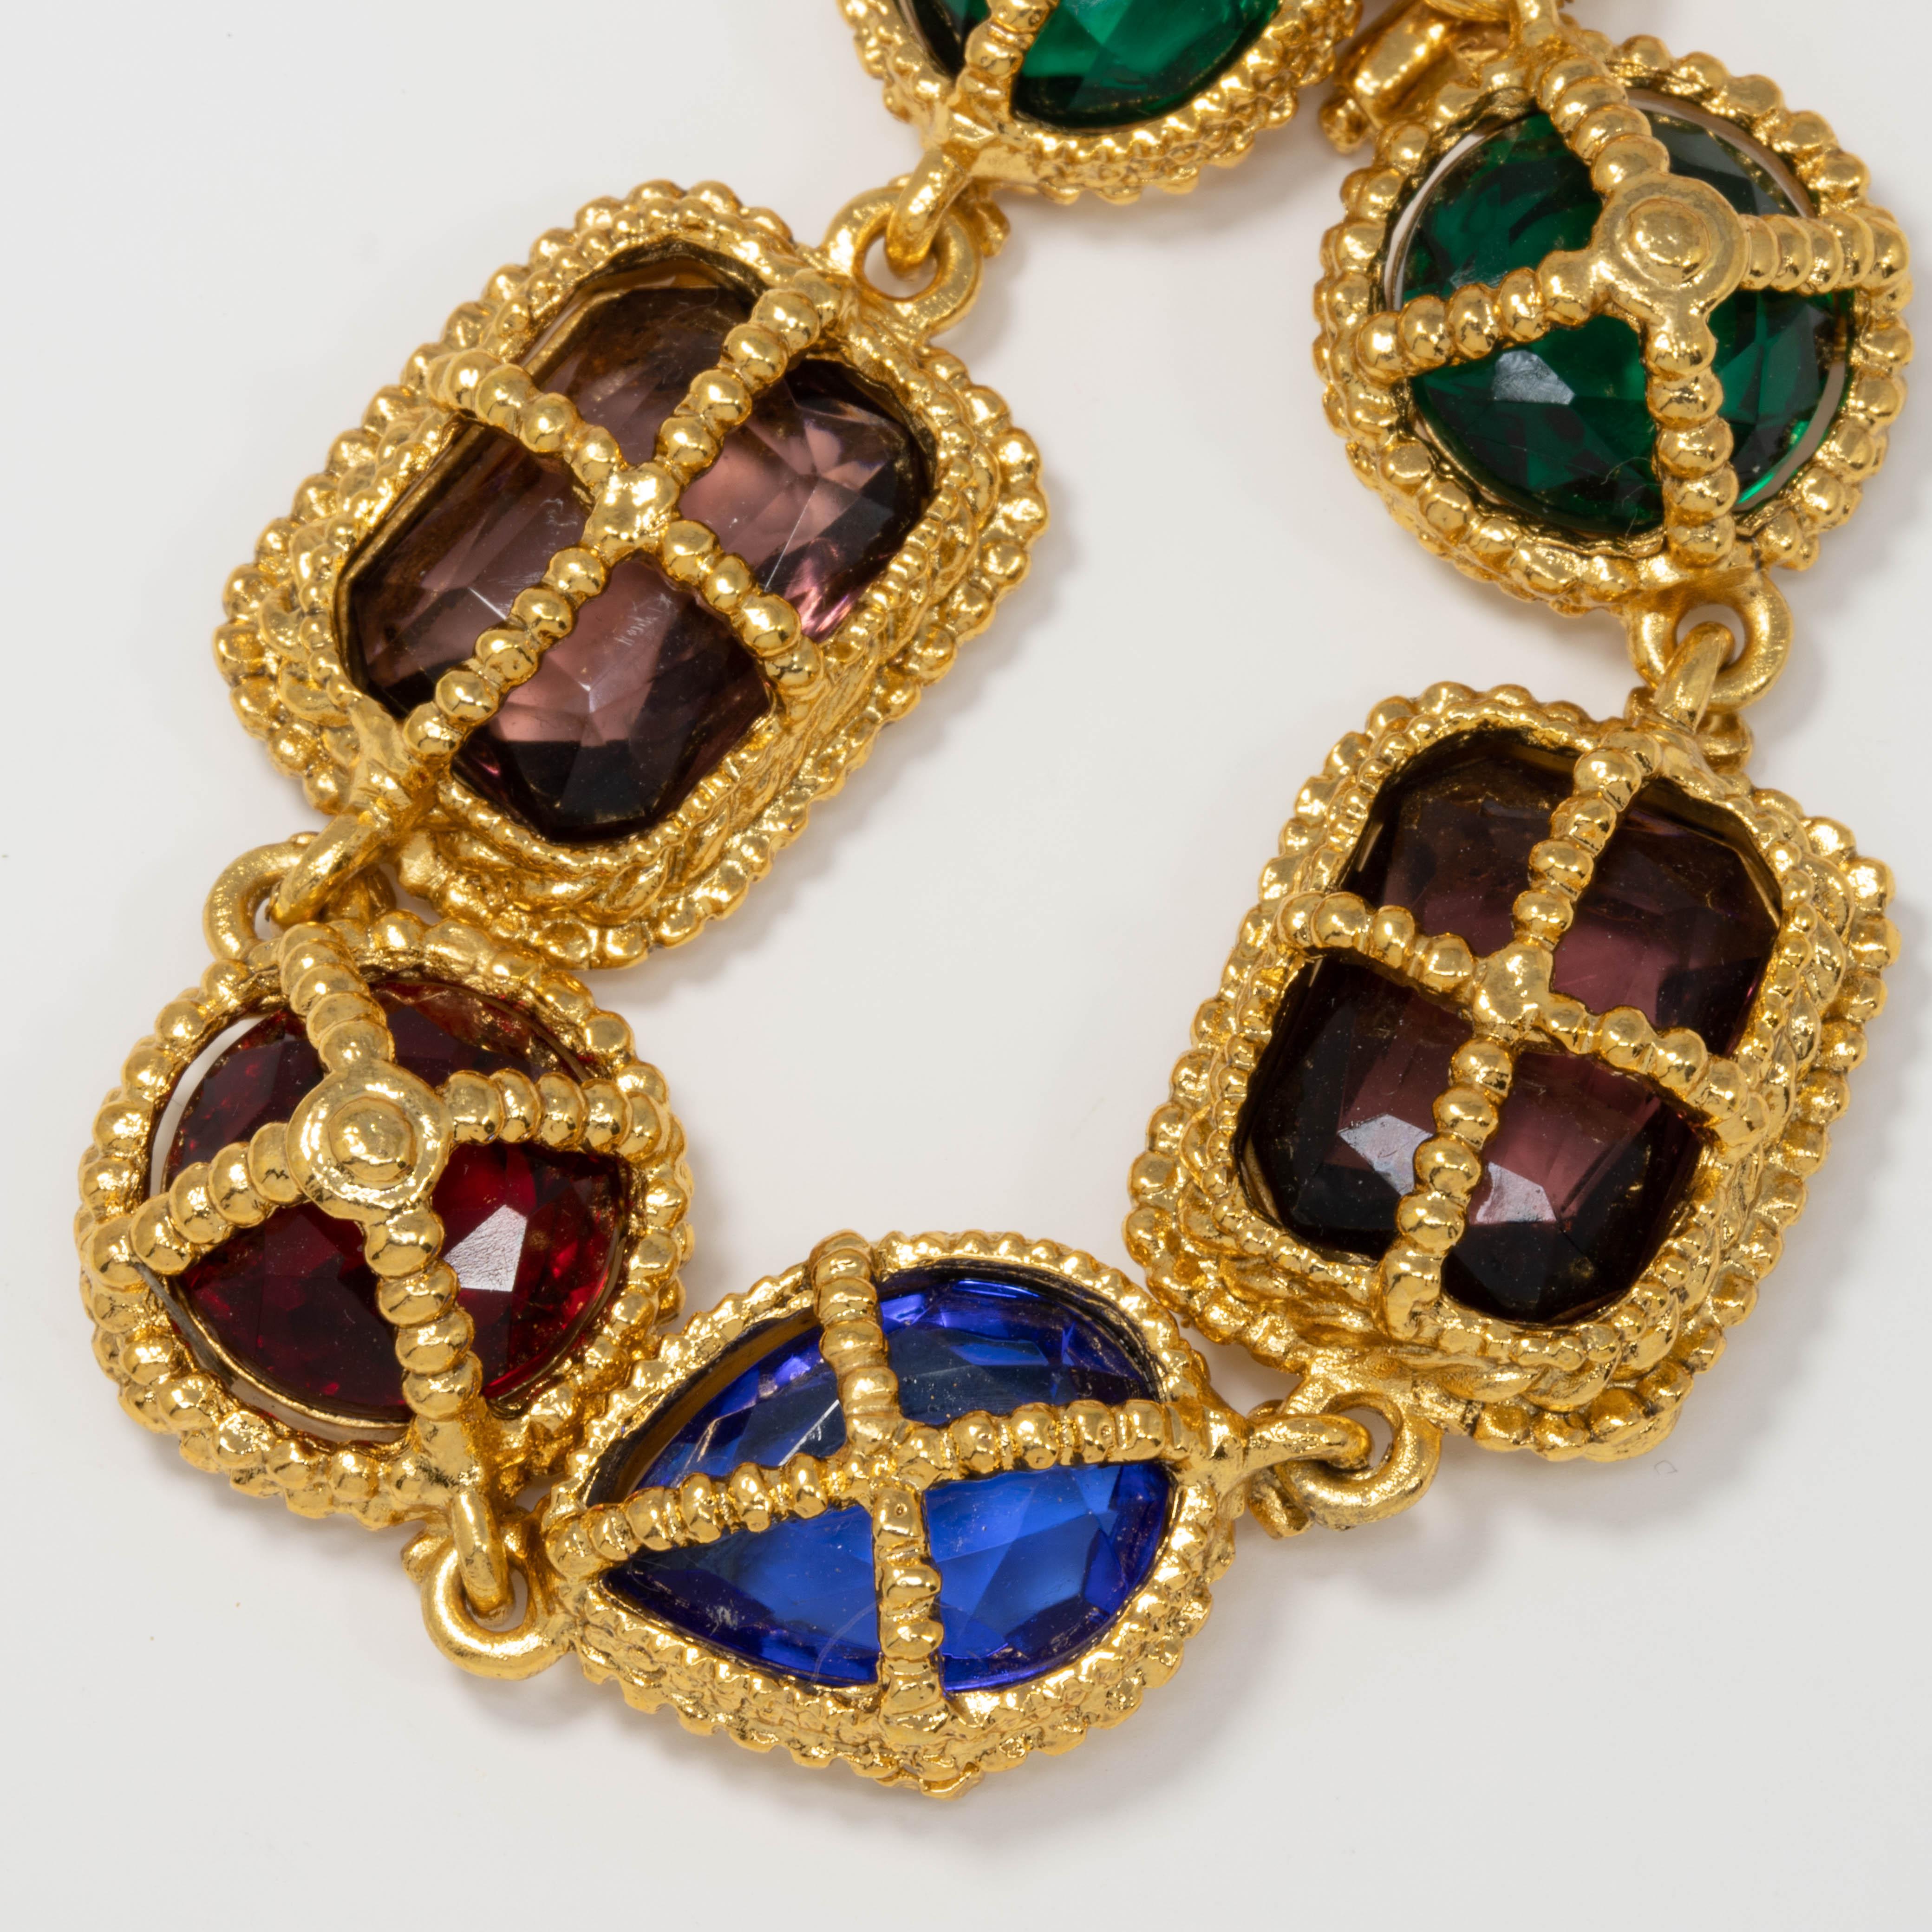 Big bold jewels sit in open-back gold-plated settings in this colorful retro-style Kenneth Jay Lane bracelet!

Crystals: Ruby, Sapphire, Amethyst, Emerald

Toggle clasp. Gold plated link bracelet.

Tags, Marks, Hallmarks: KJL